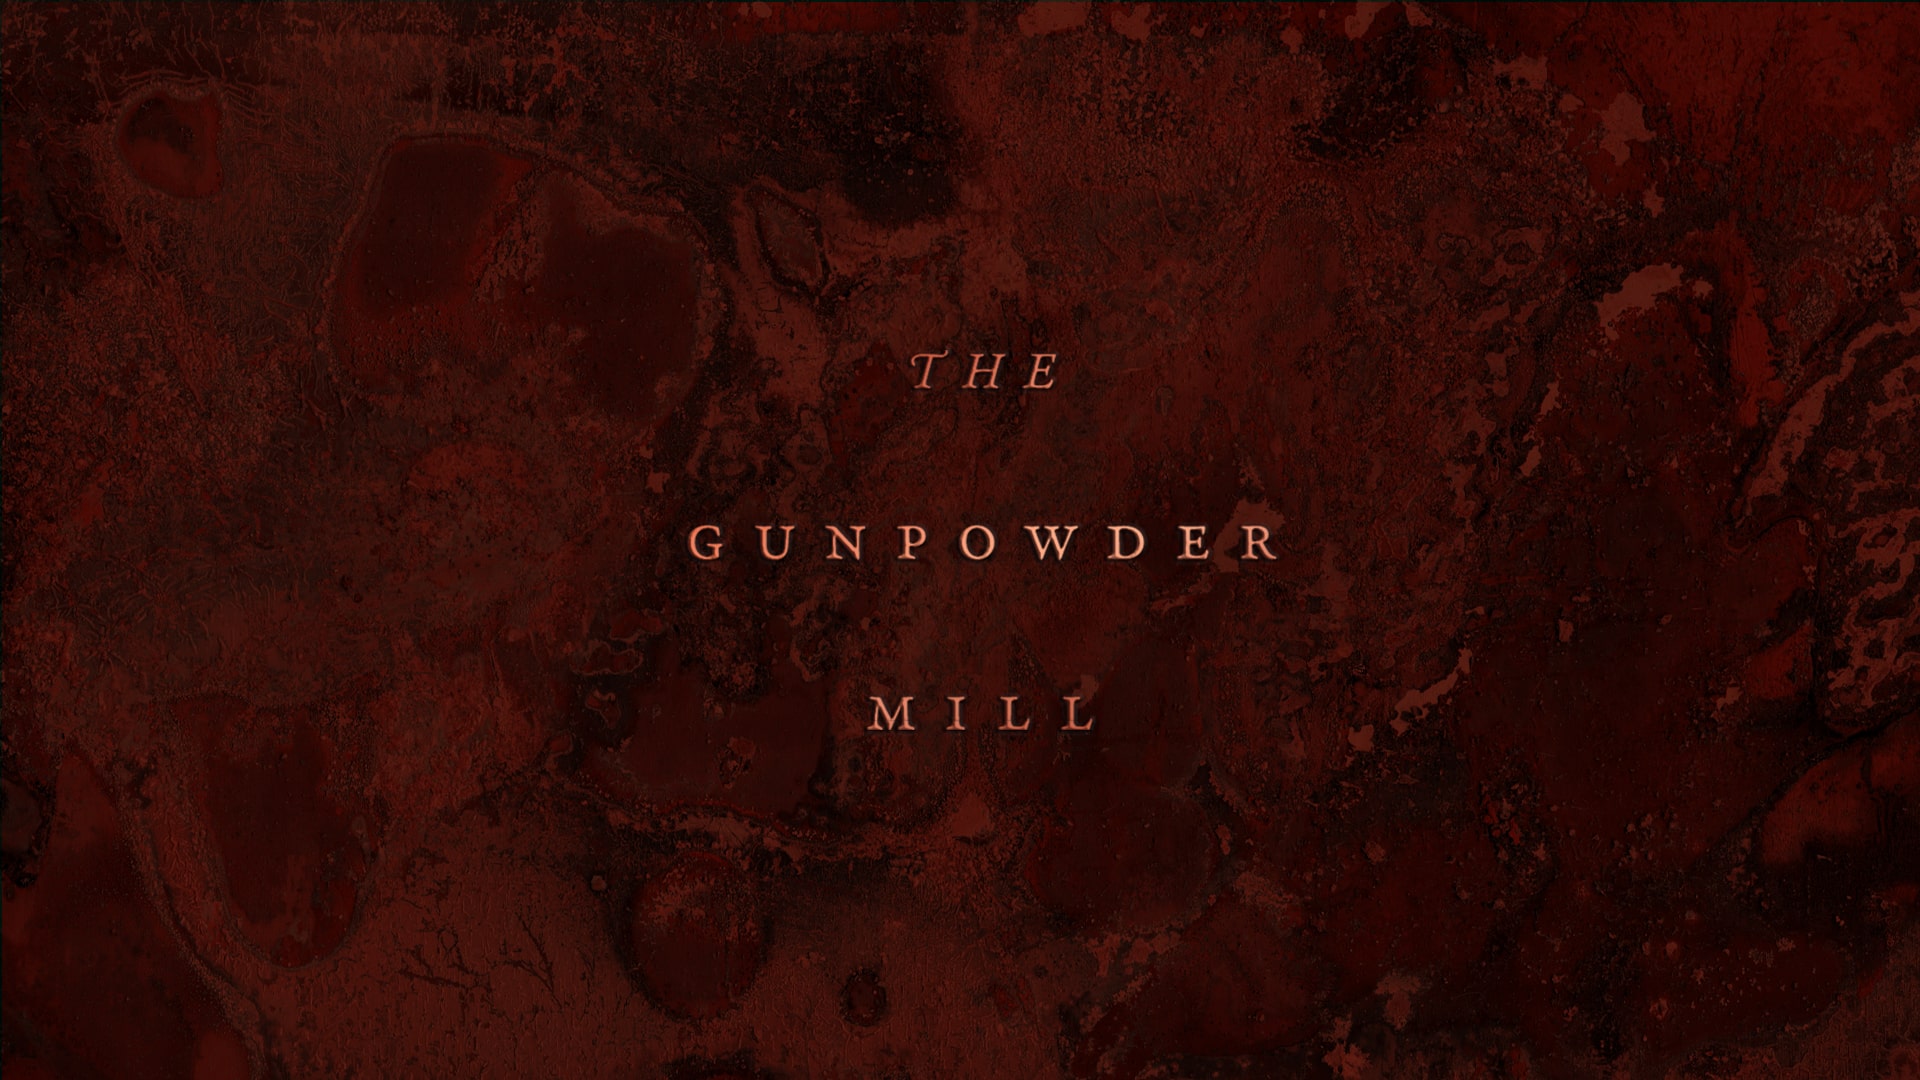 Conceptual Identity for a Luxury Hotel The Gunpowder Mill by Student Ruby A Douglass